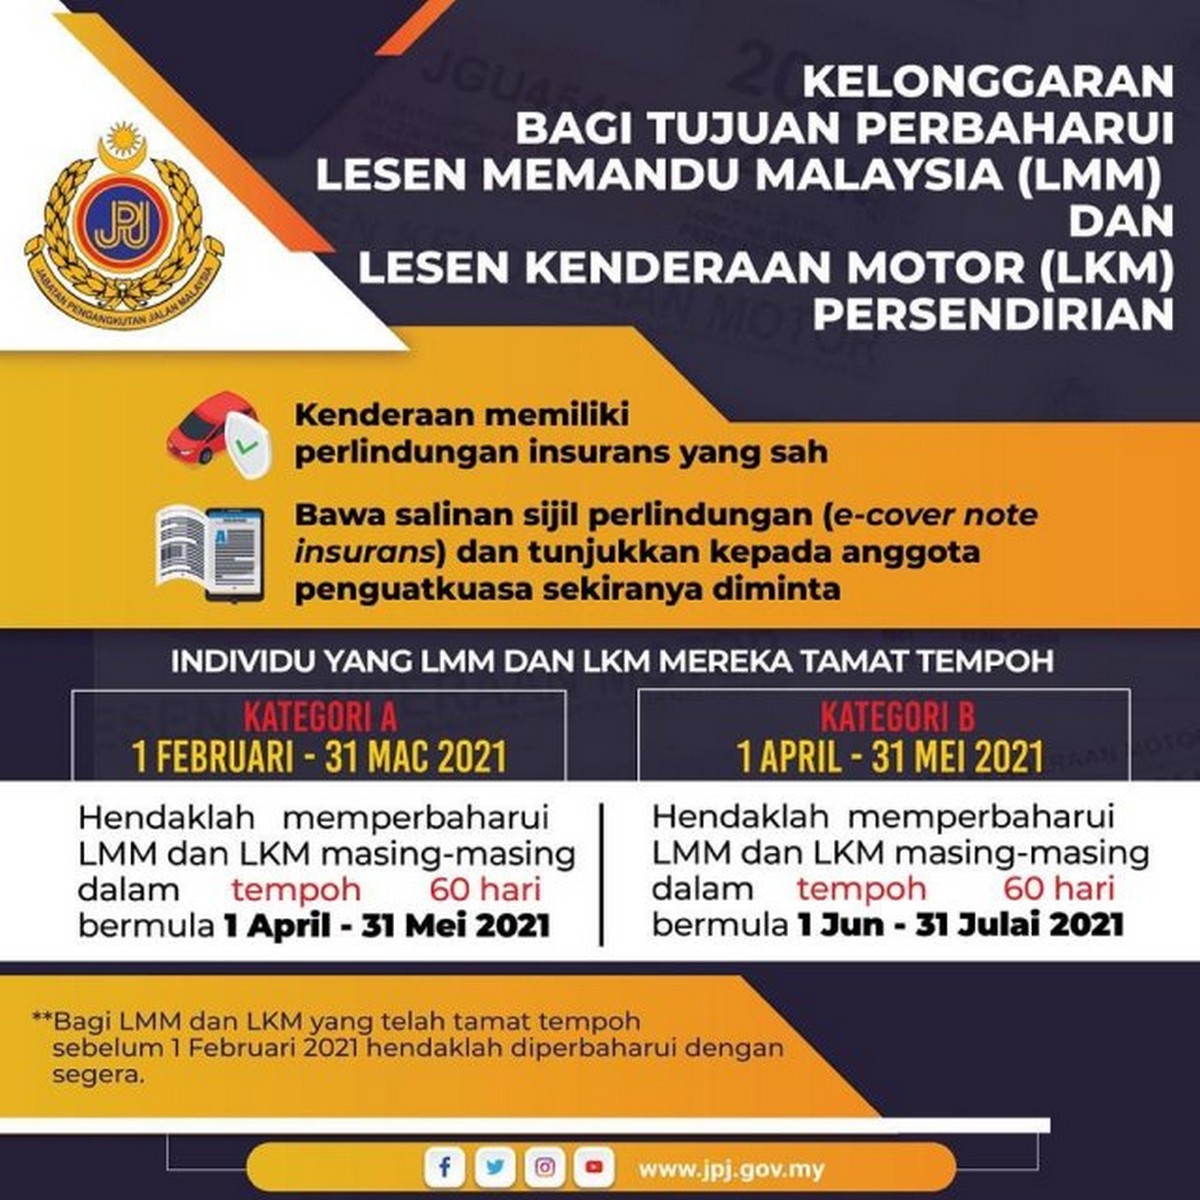 Jpj Reopen And Allows Drivers To Updates And Renew License Or Roadtax Overdue Everydayonsales Com News